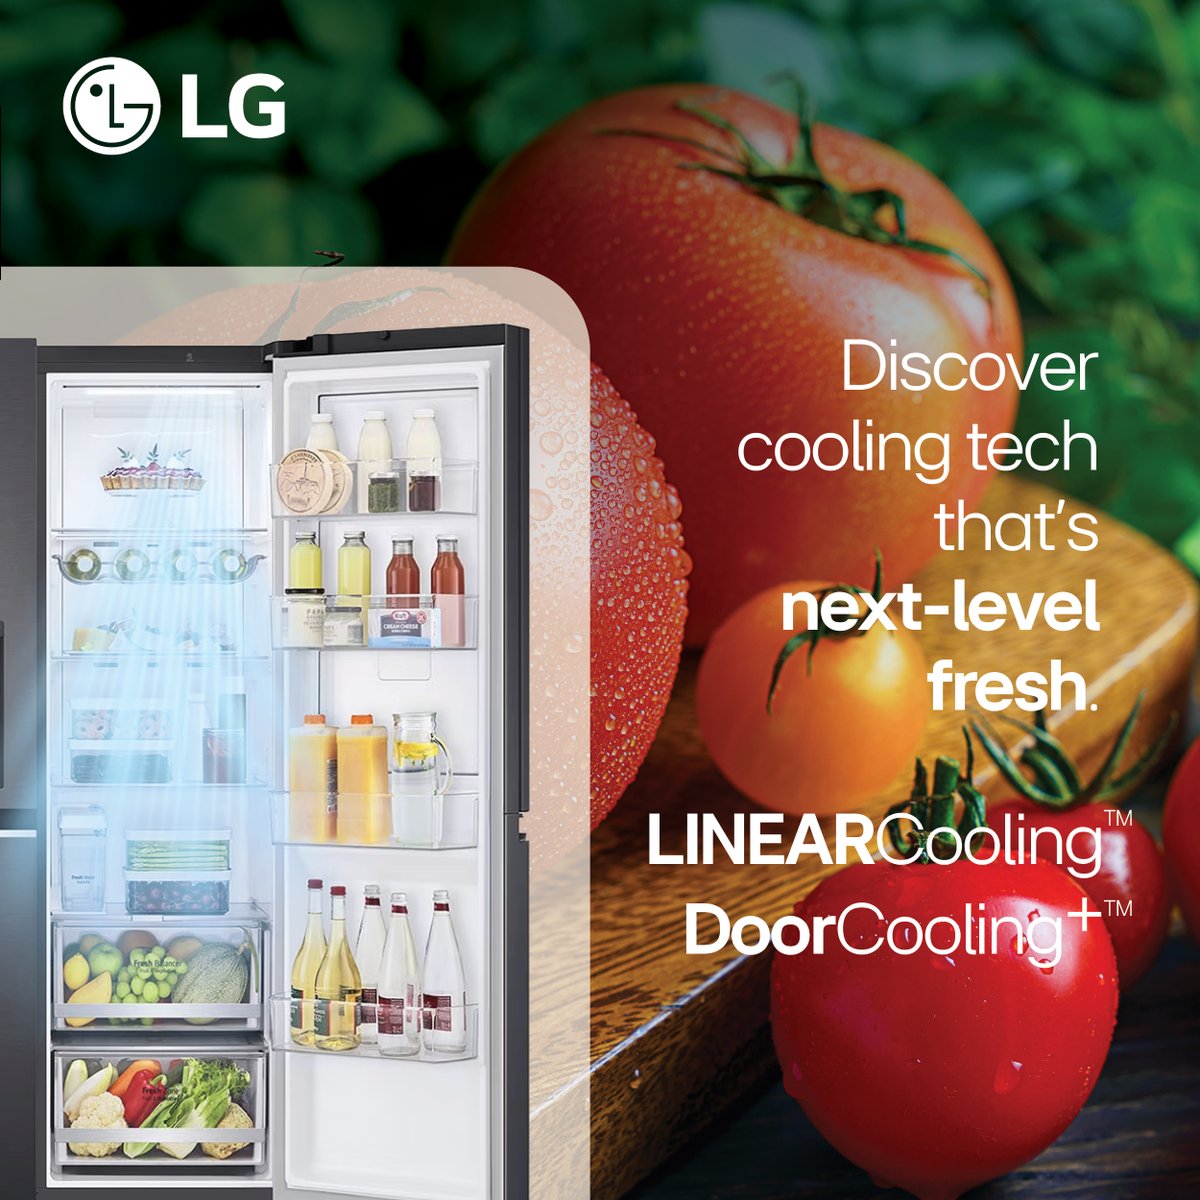 Elevate your kitchen game with LG fridges! 😎 Enjoy fresher food, colder drinks, and total control at your fingertips. 🥦🥛
 
Upgrade your lifestyle today: lge.ai/6018b60Kj
 
 #LG #LifesGood #LGRefrigeration #KitchenInnovation #Cool #FreshandCool #LGHomeAppliances